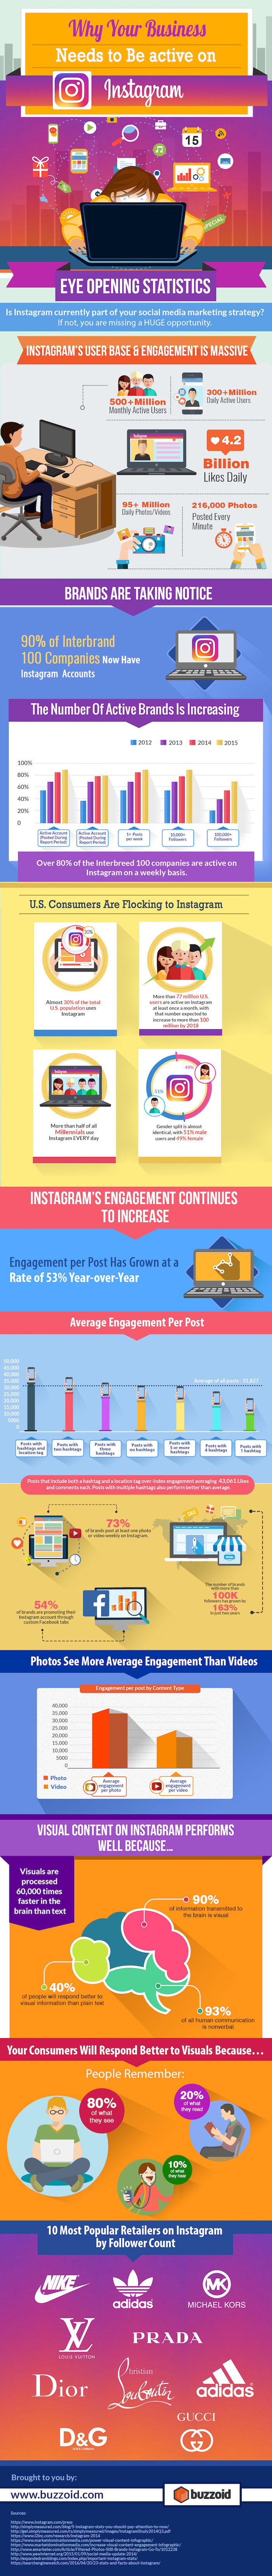 Why Instagram Needs to Be Part of Your Marketing Strategy (Infographic)